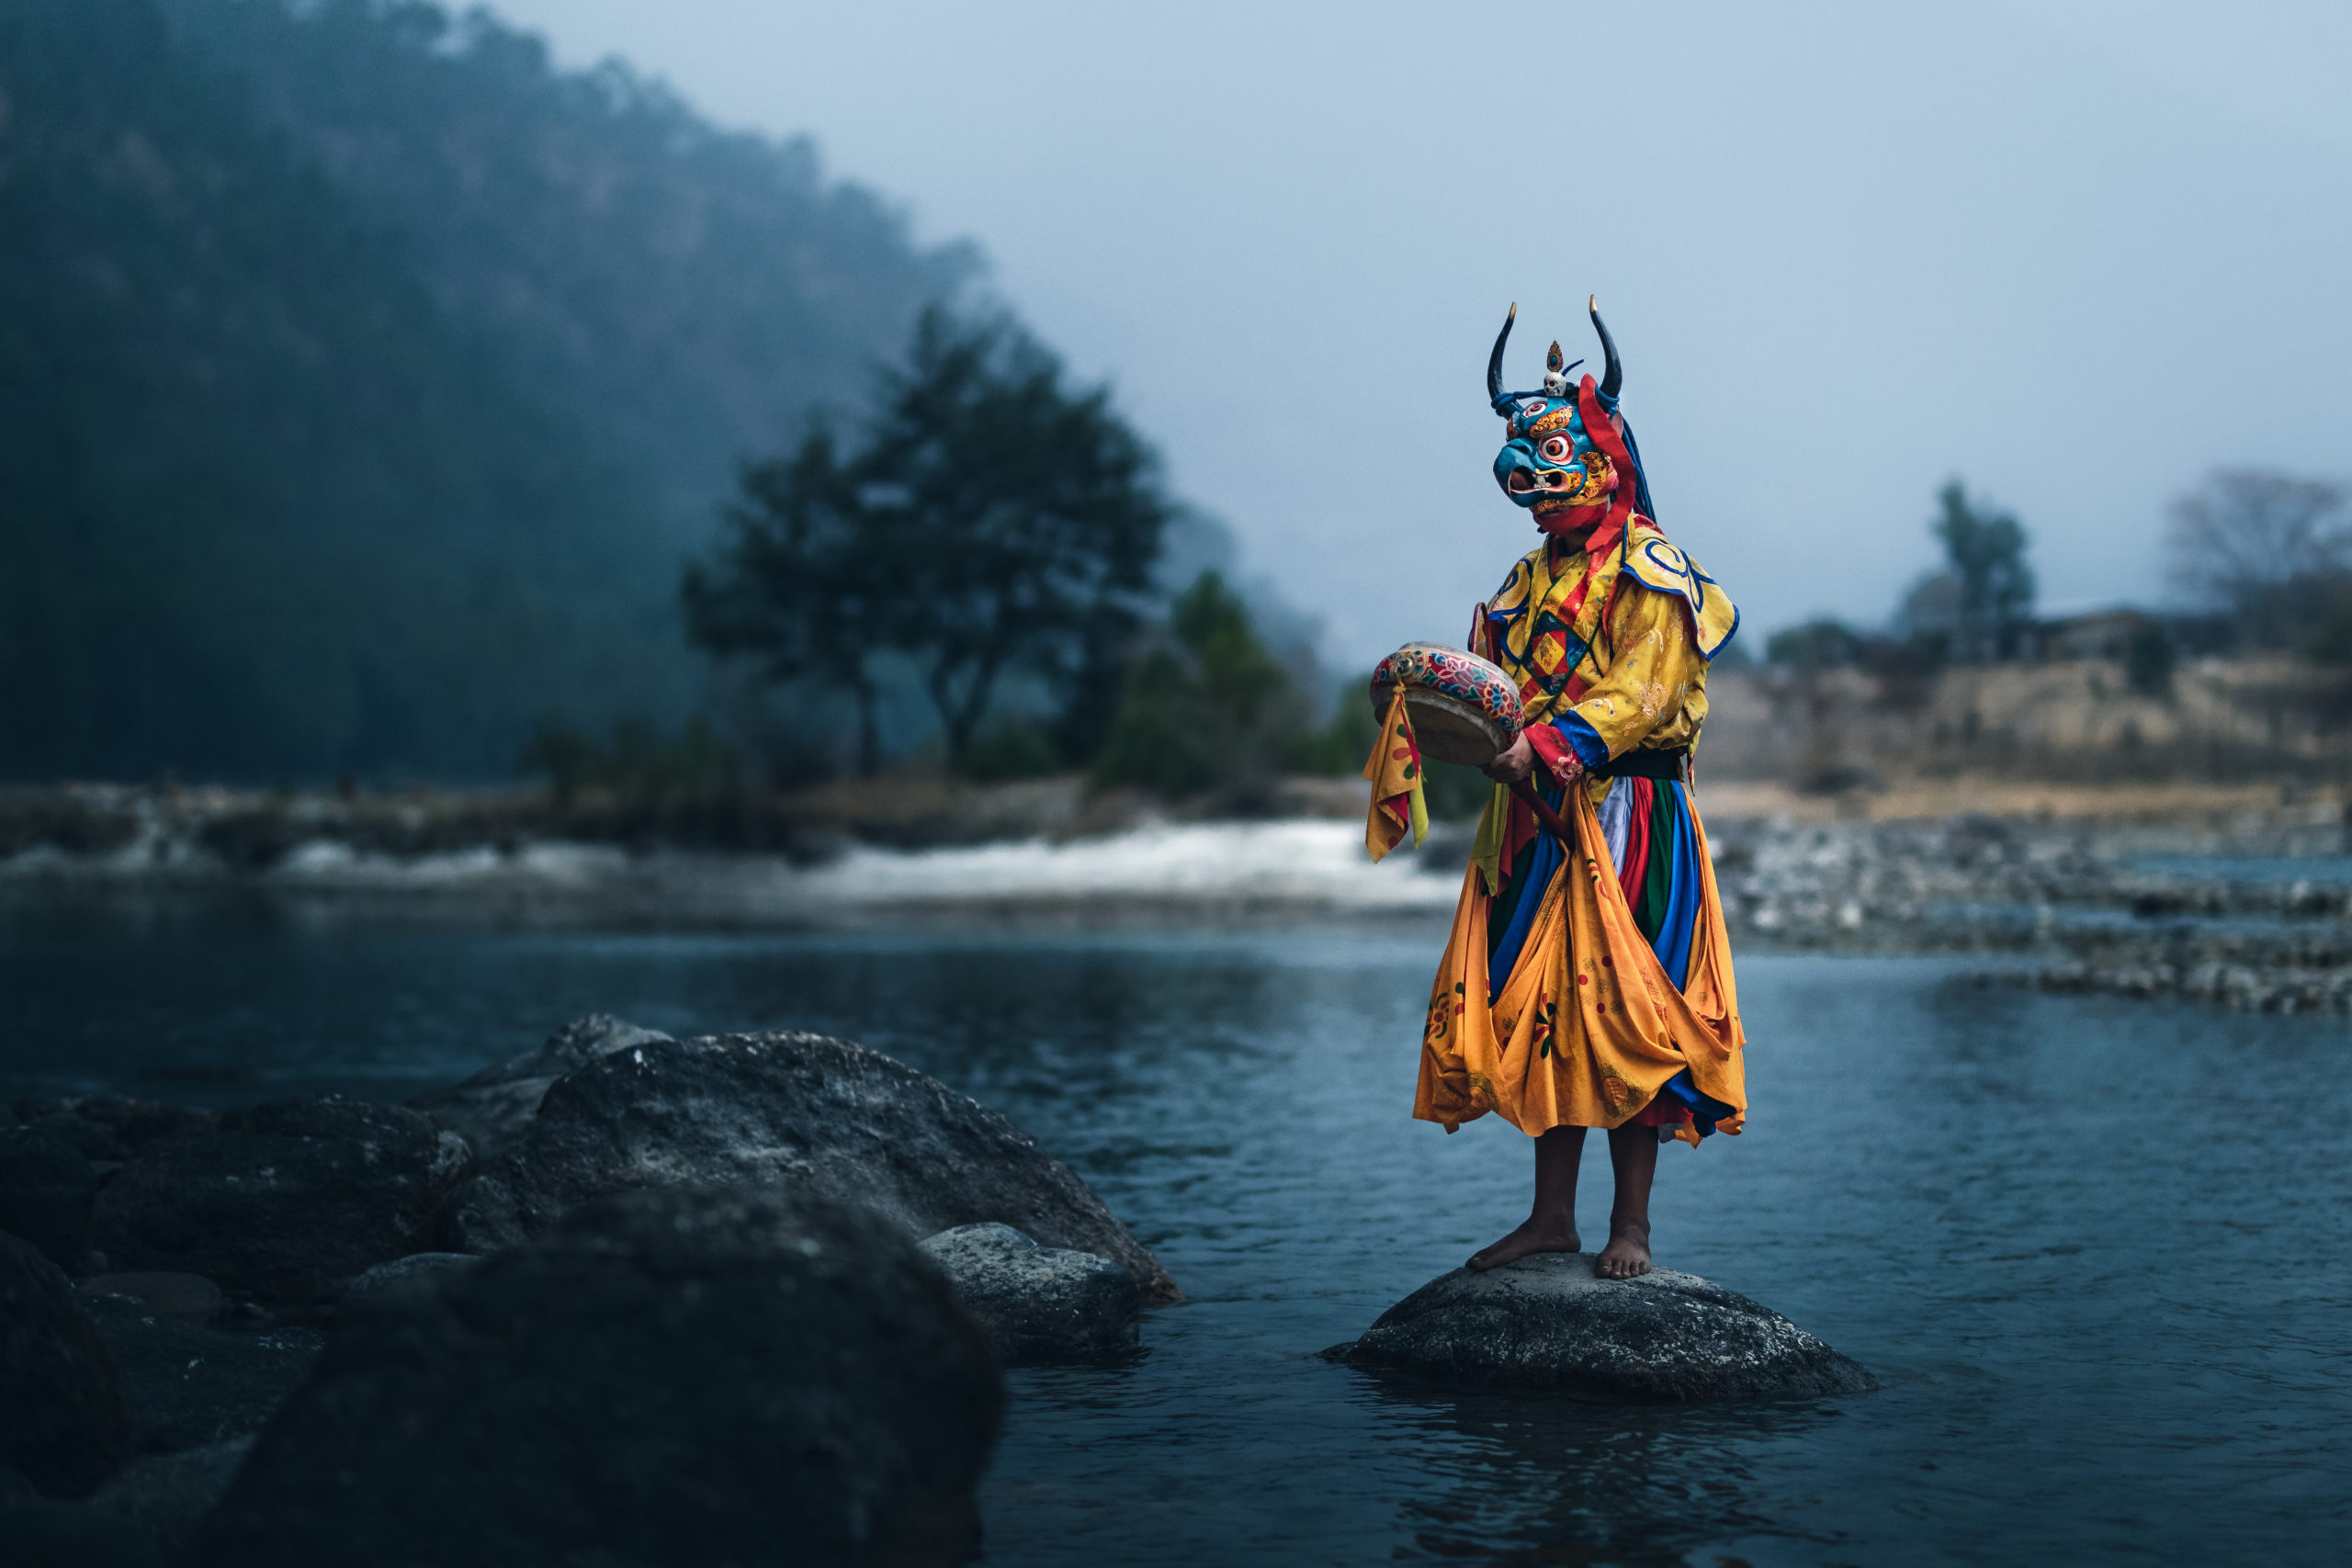 Photography of Bhutan's traditional masked dancers in Punakha